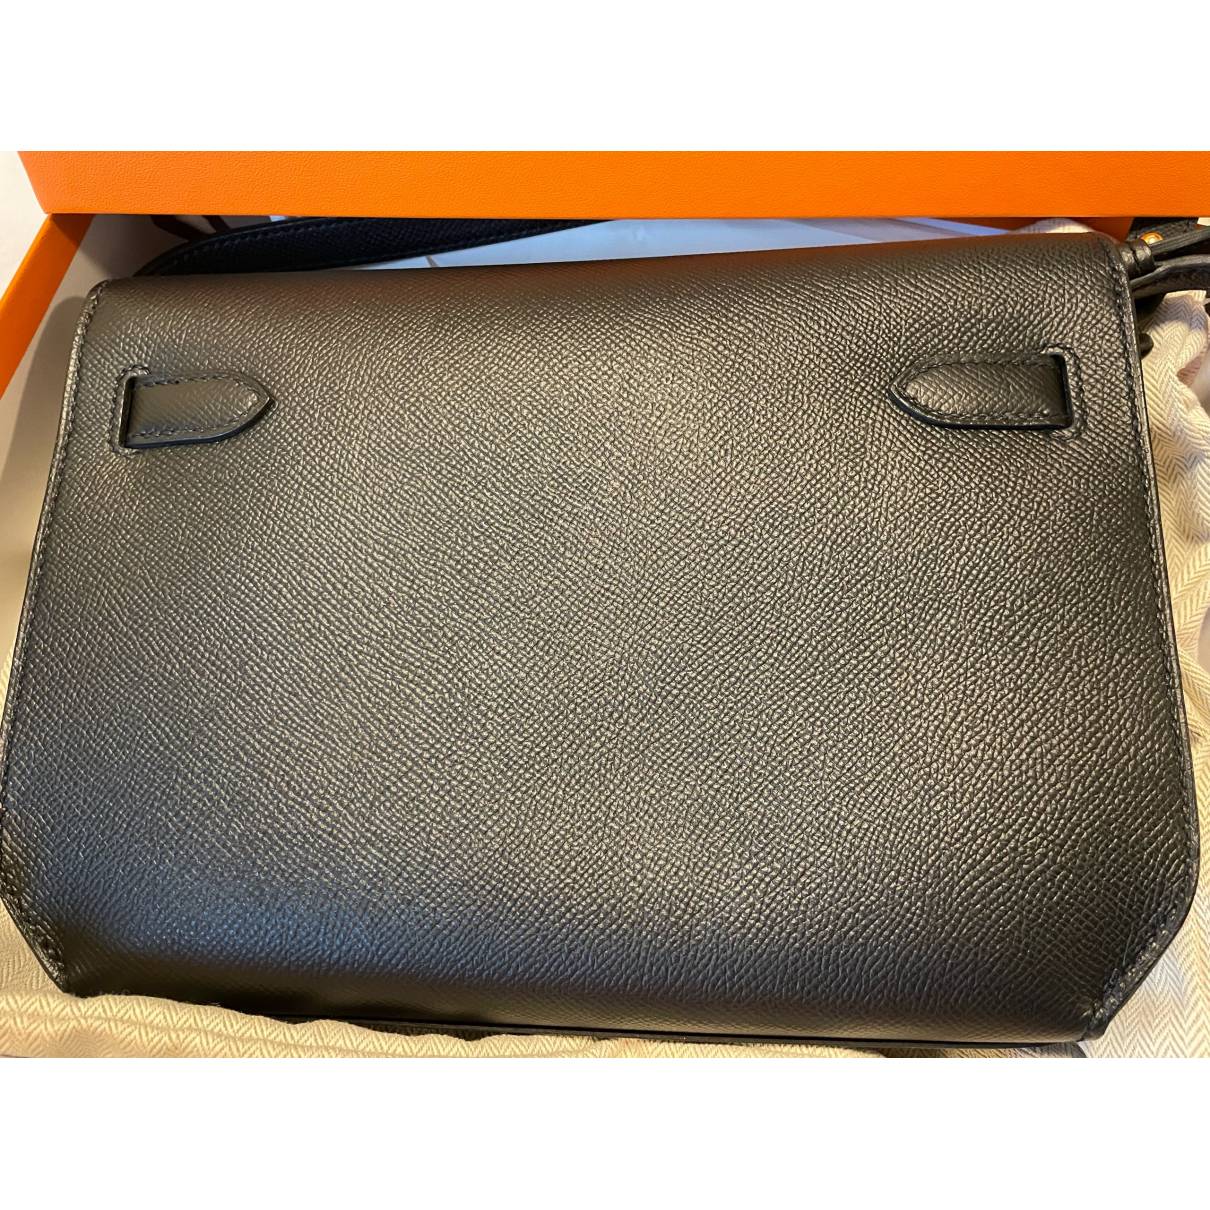 Hermes Kelly Depeches 25 in stock now ✔️Colour : Noir Leather